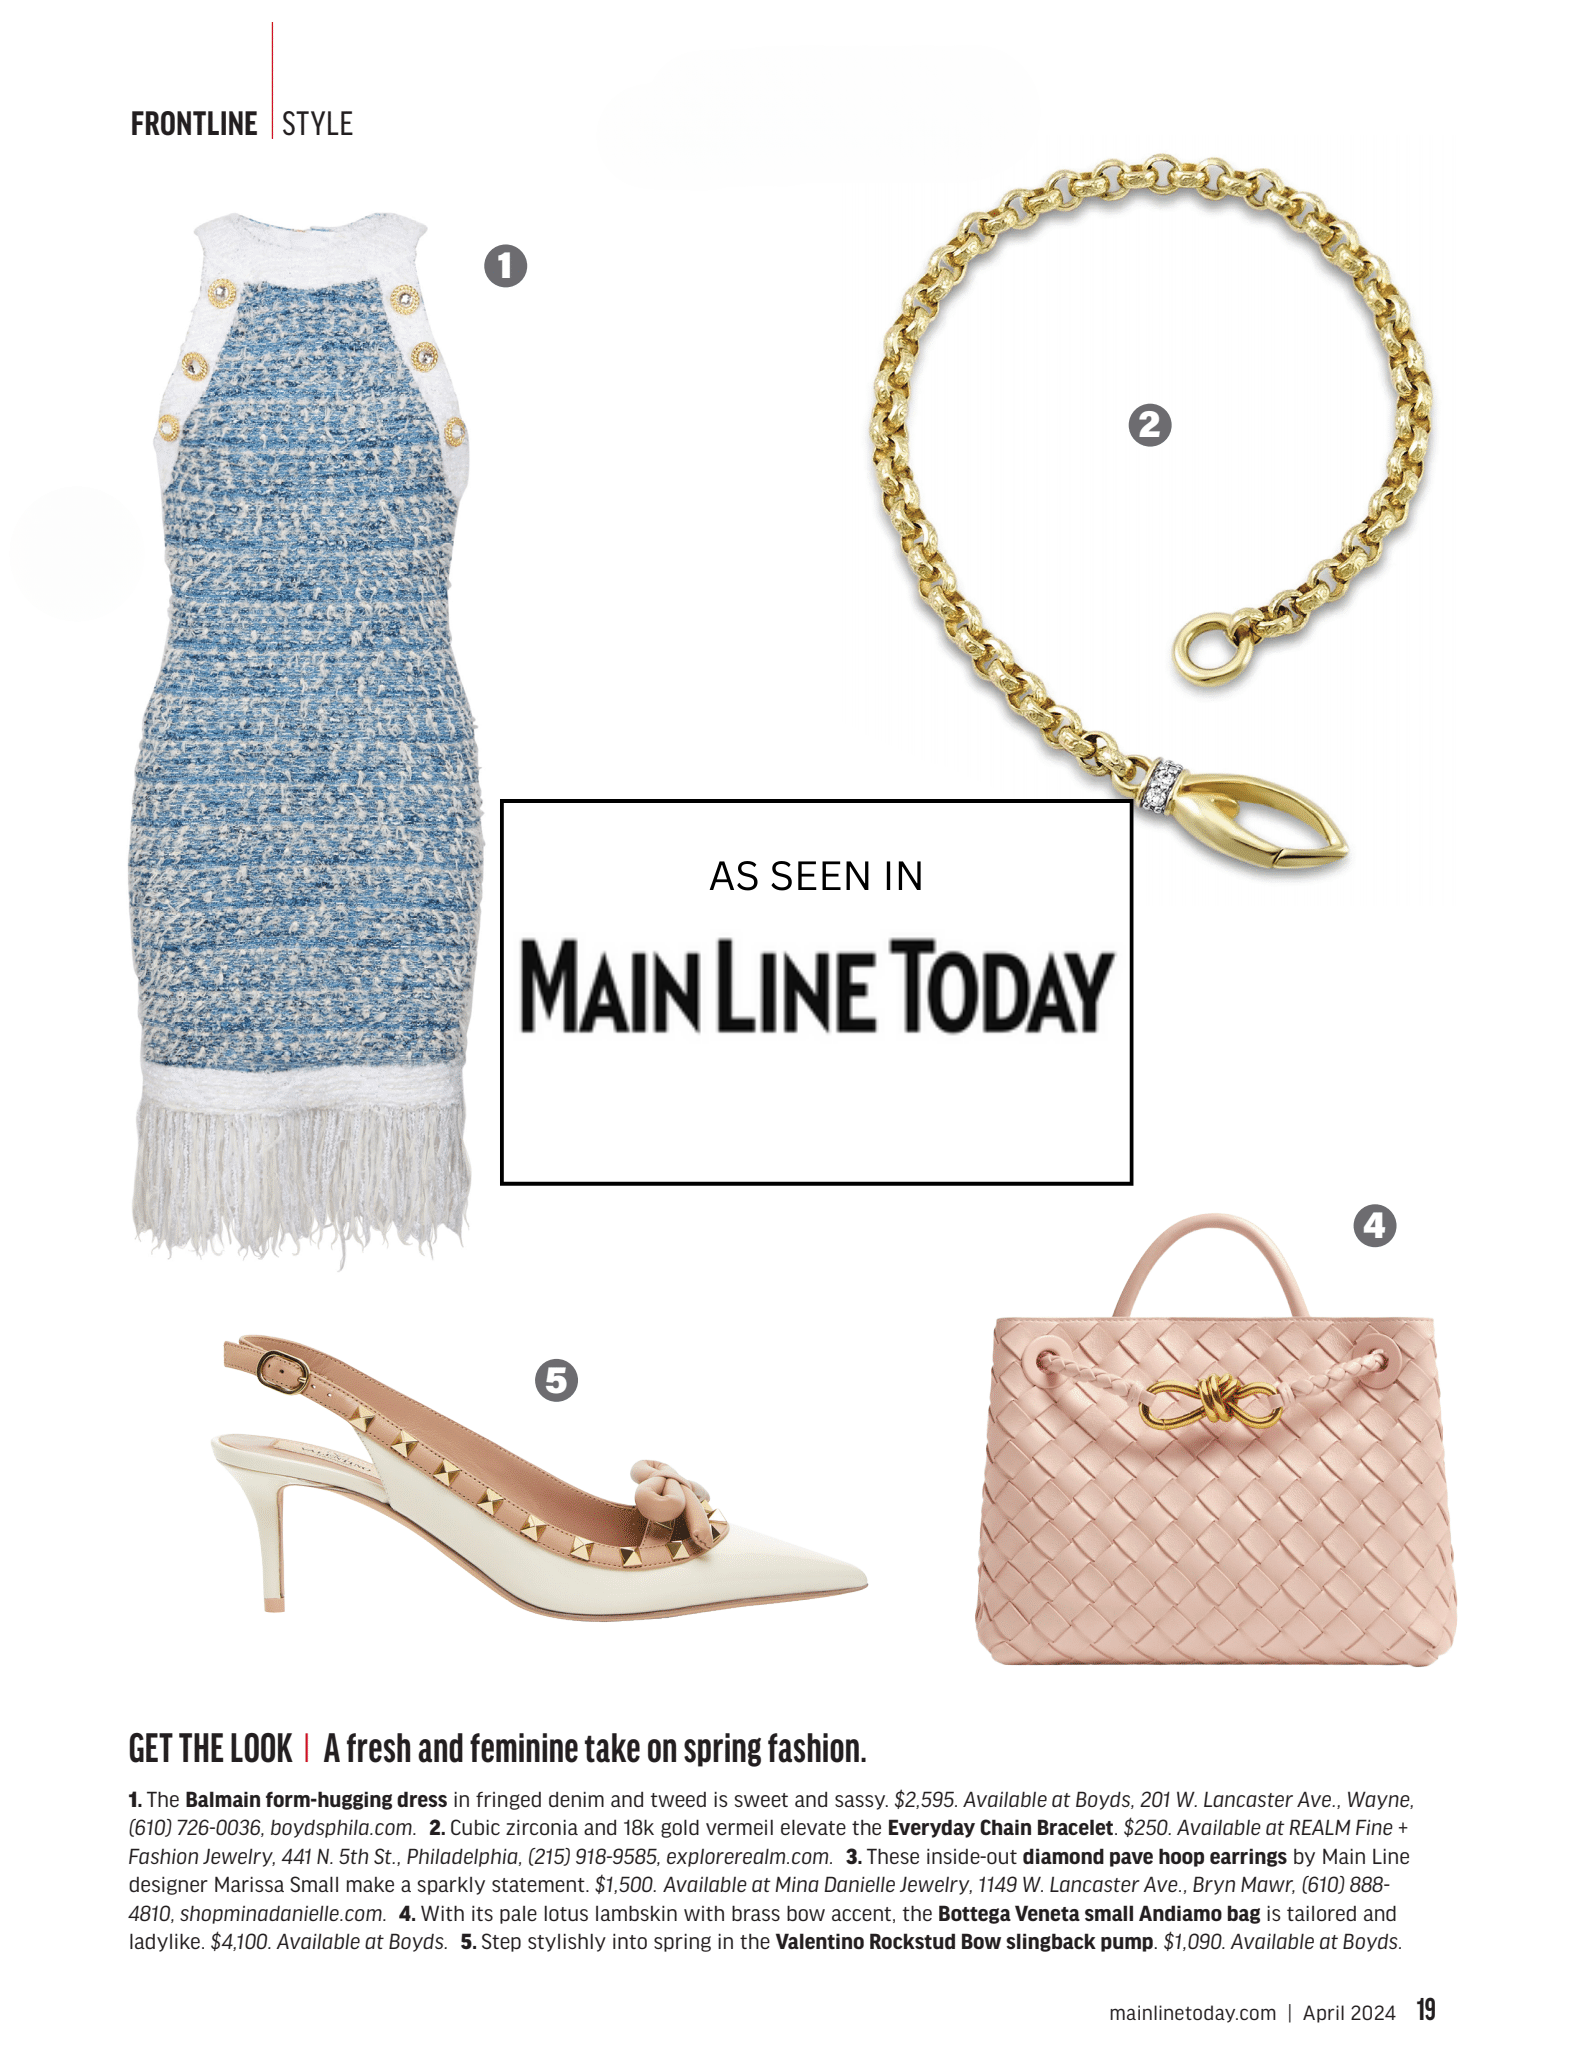 Main Line Today magazine features REALM Everyday Chain Bracelet - April 2024 issue